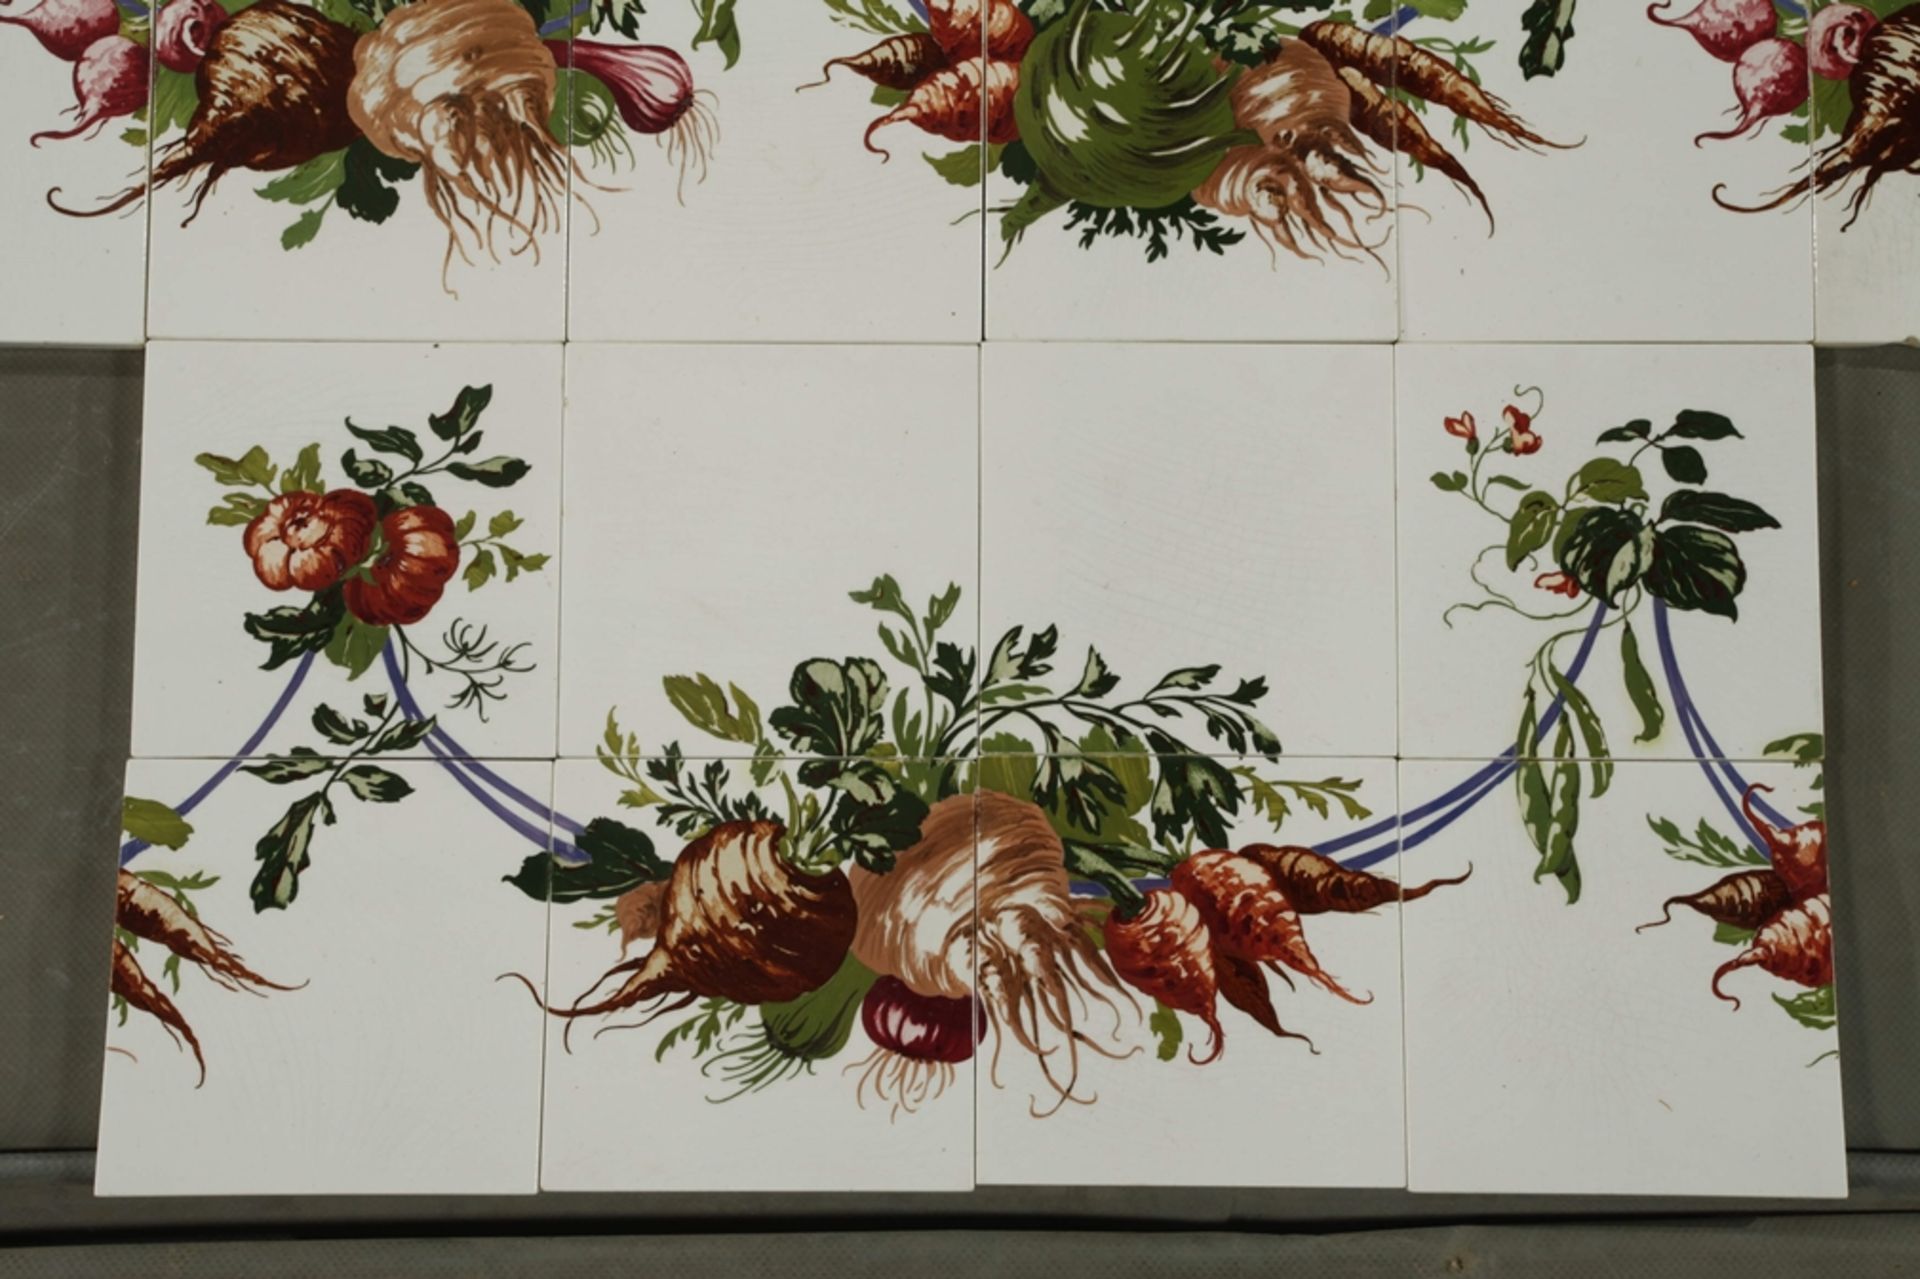 Villeroy & Boch wall tiles for a kitchen - Image 4 of 5